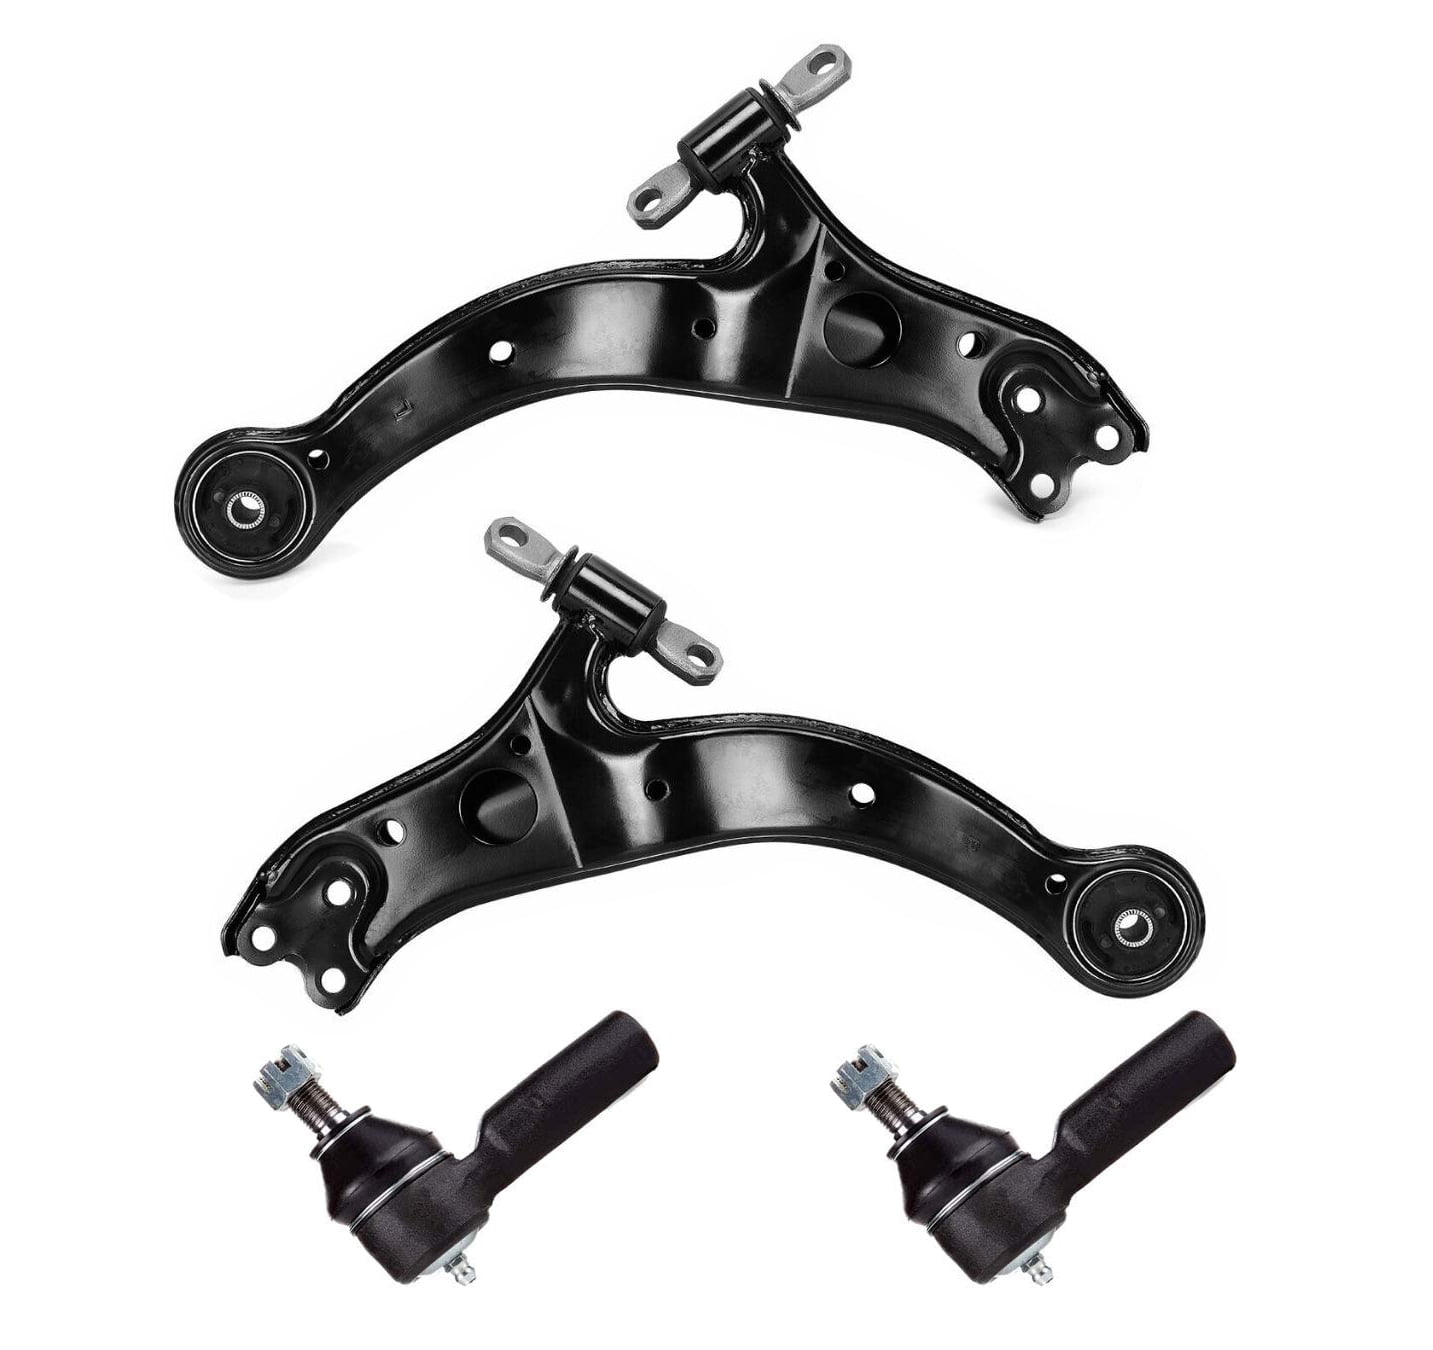 w/Bushings 1999-2003 Toyota Solara/Sienna Front Lower Control Arm Replacement for 1998-2004 Toyota Avalon 